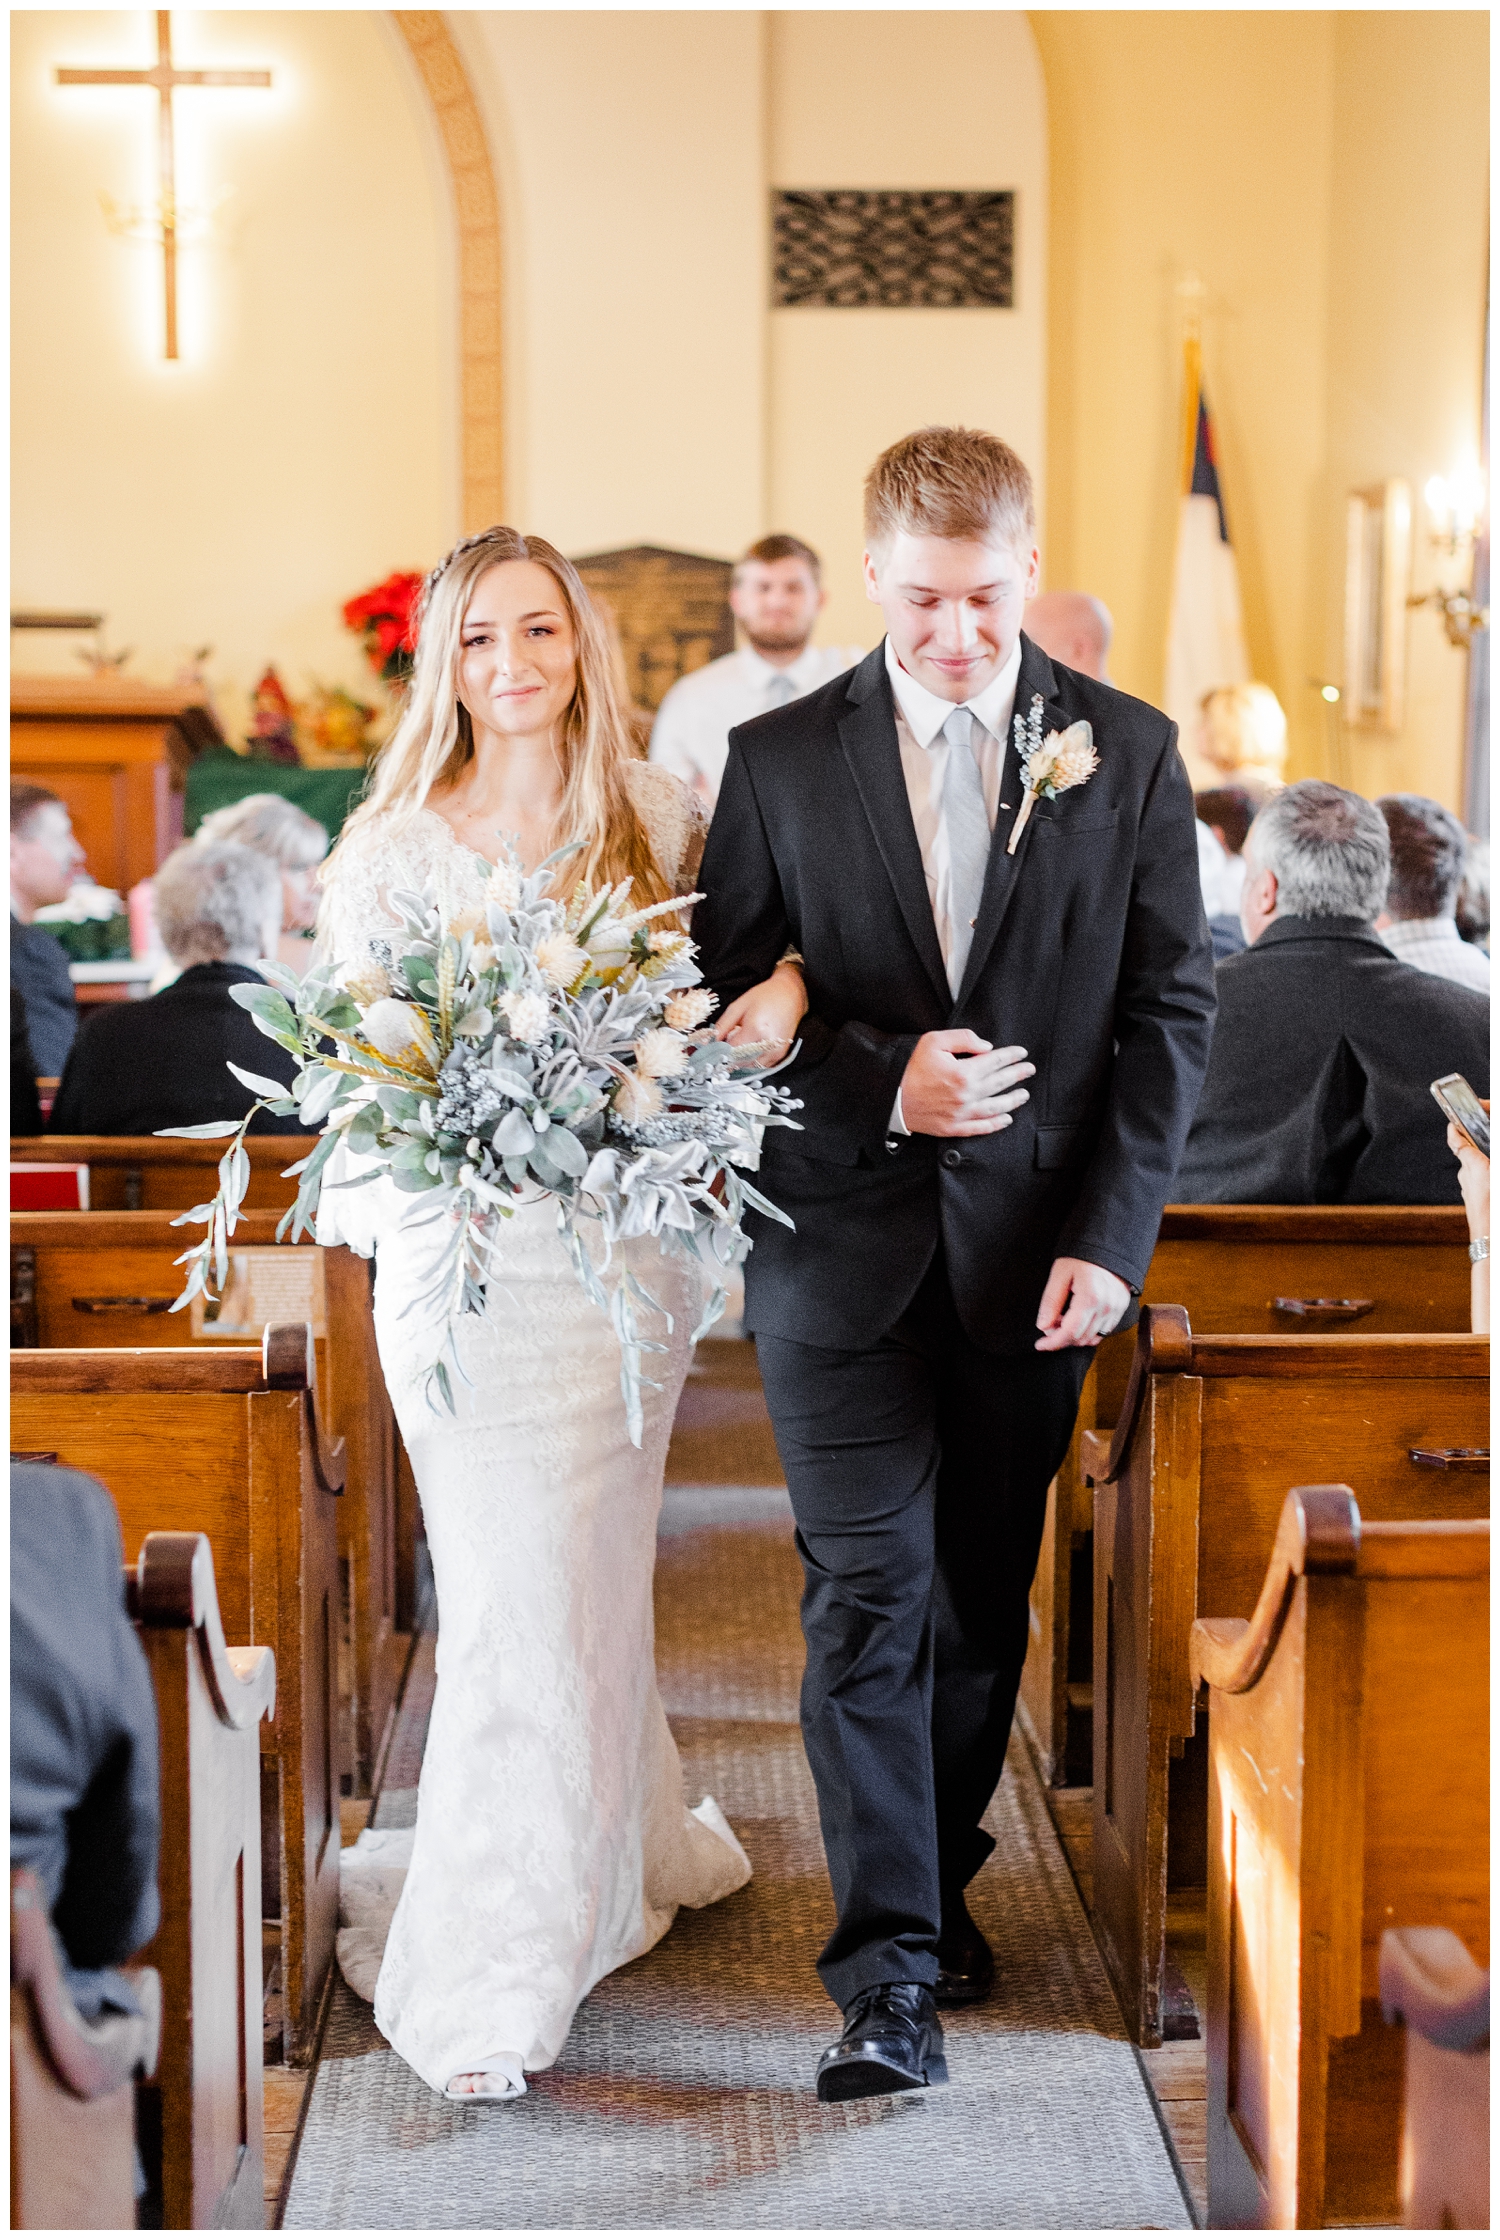 Bride and groom walk down the aisle following their wedding ceremony at The Little Brown Church in the Vale in Nashua, IA | CB Studio